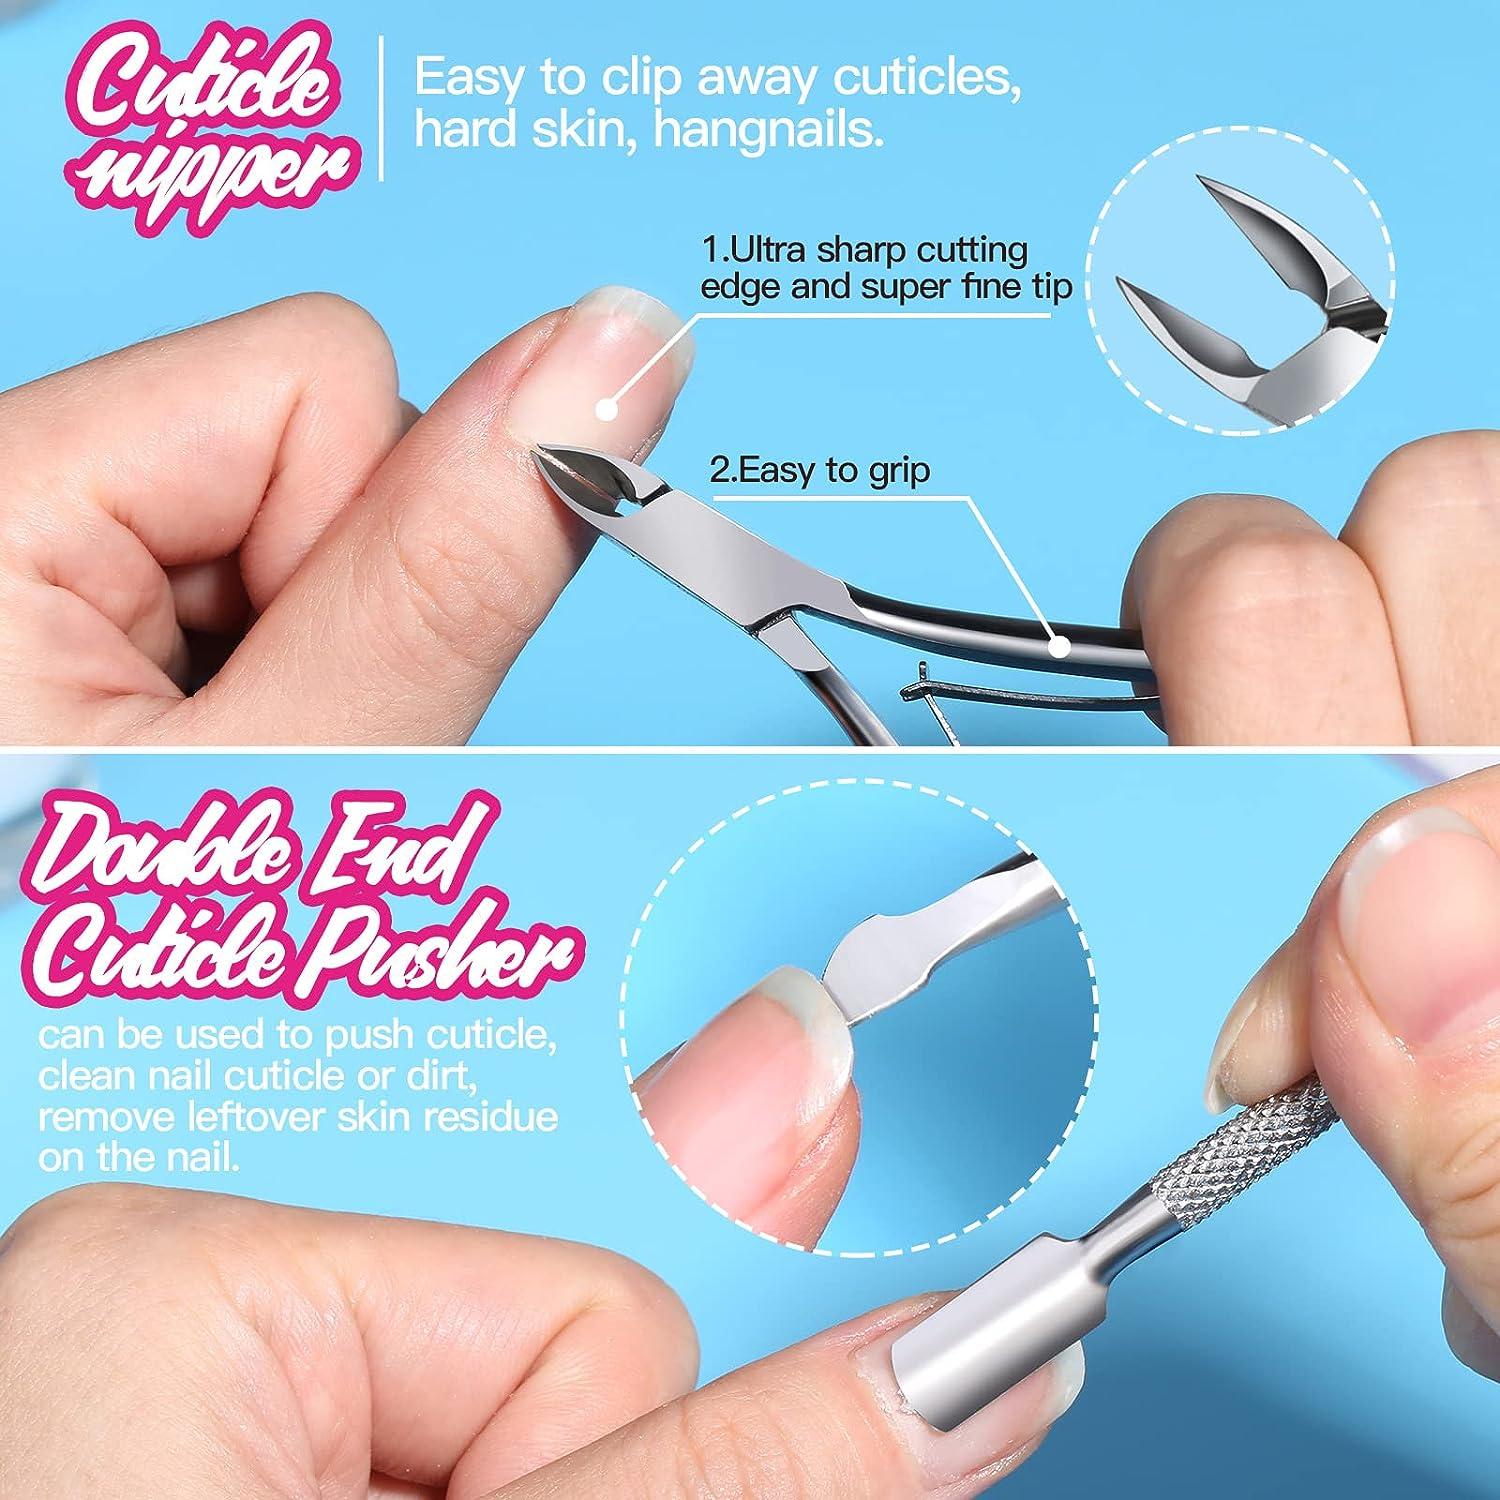 How to Use Blue Cross Cuticle Remover [Product Spotlight] - YouTube